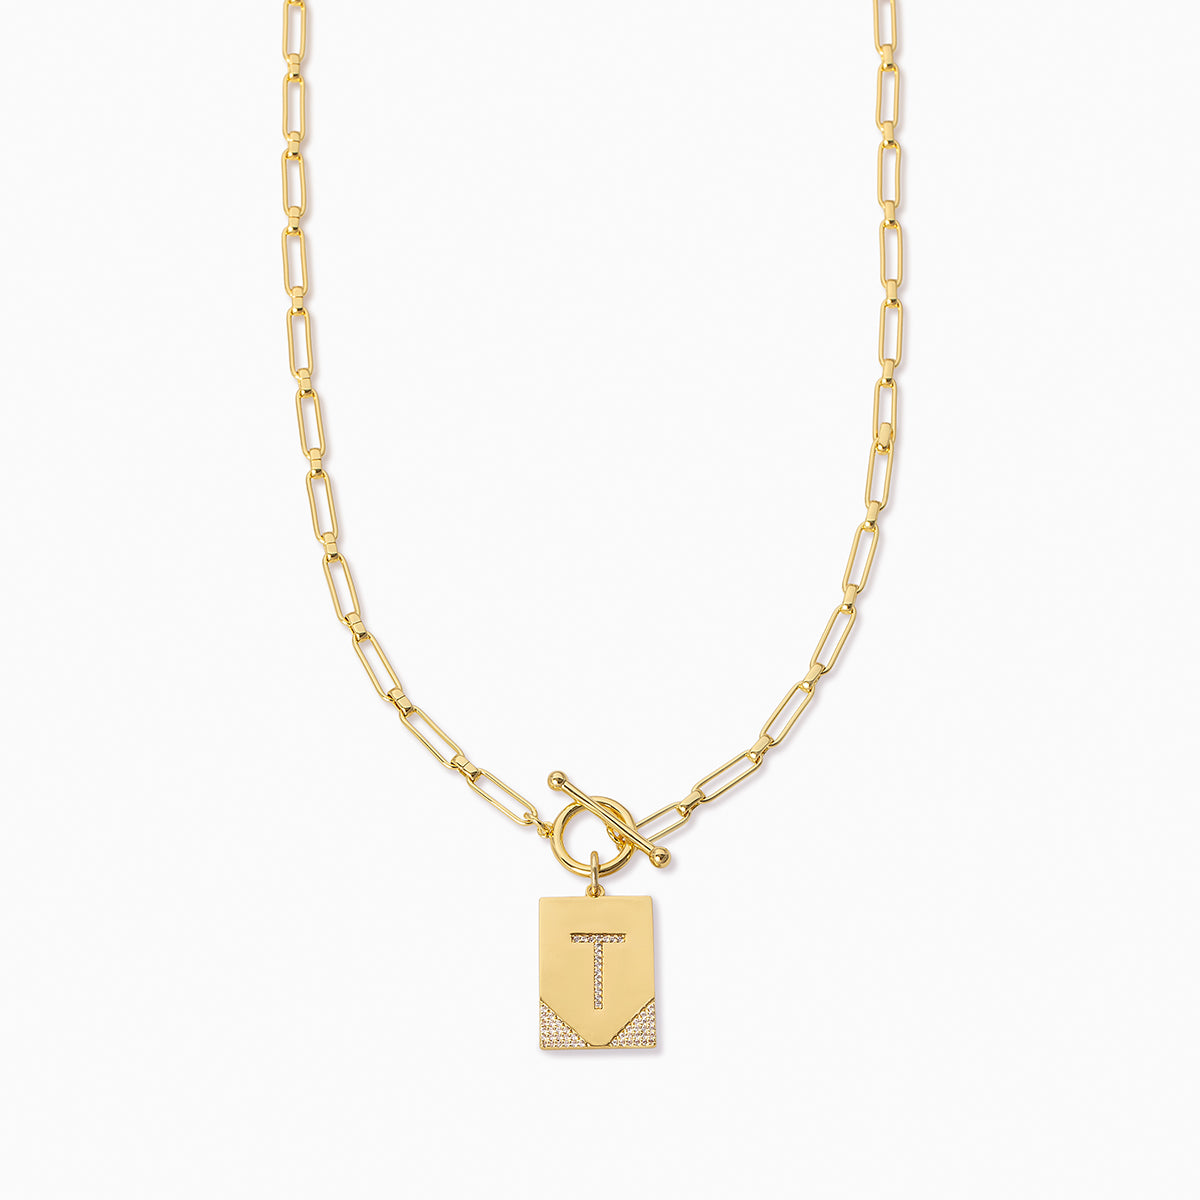 Leave Your Mark Chain Necklace | Gold  T | Product Image | Uncommon James